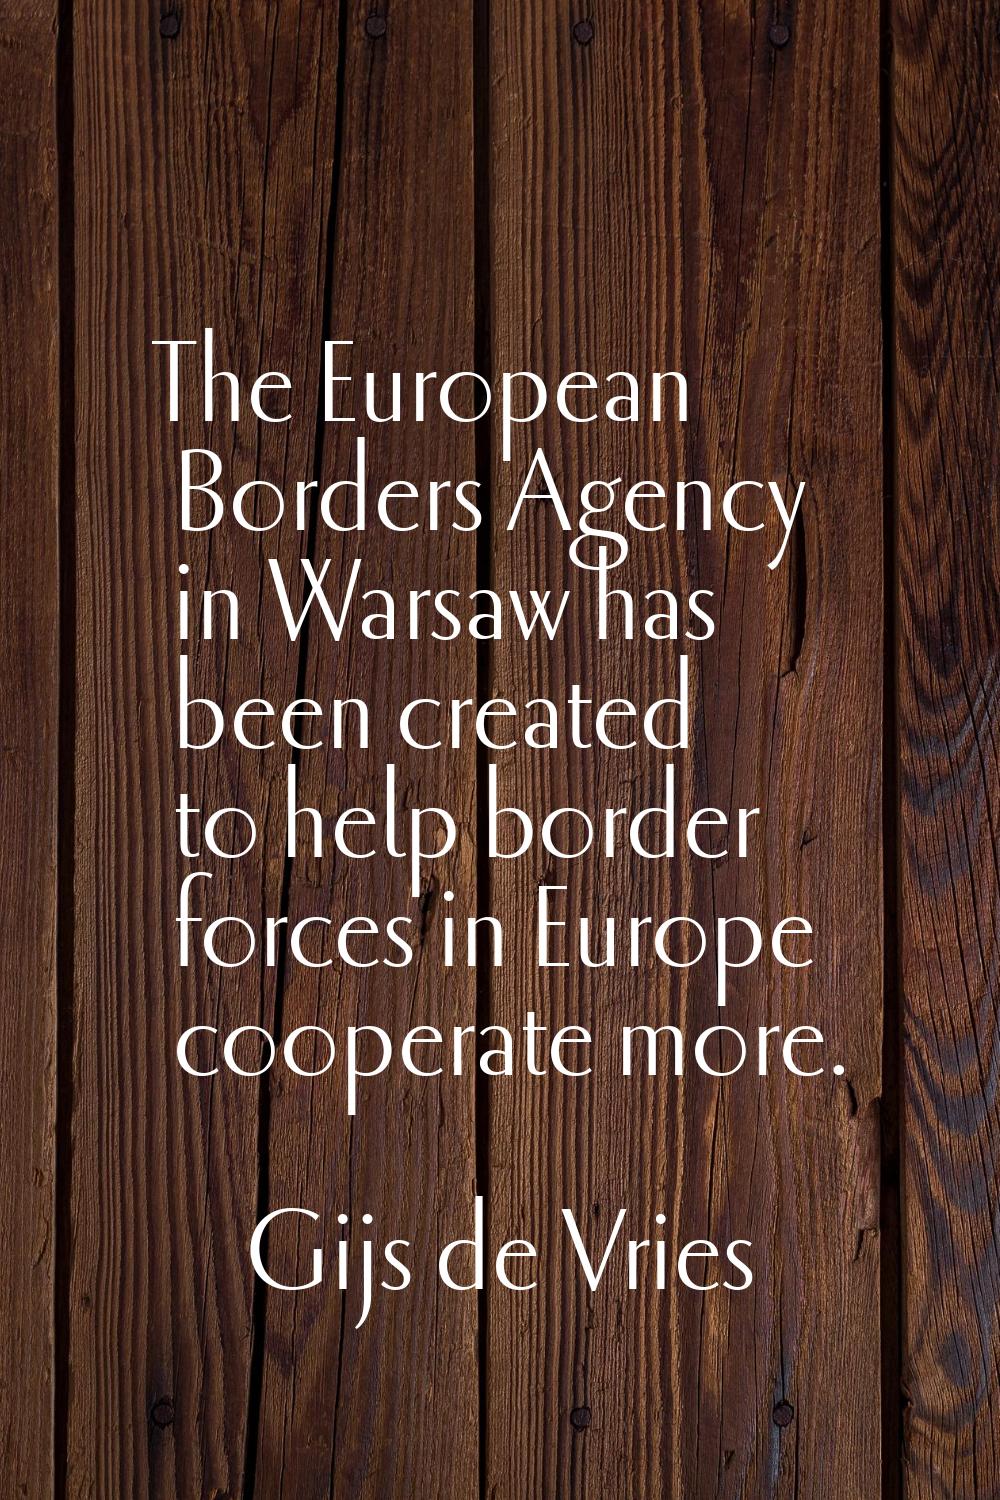 The European Borders Agency in Warsaw has been created to help border forces in Europe cooperate mo